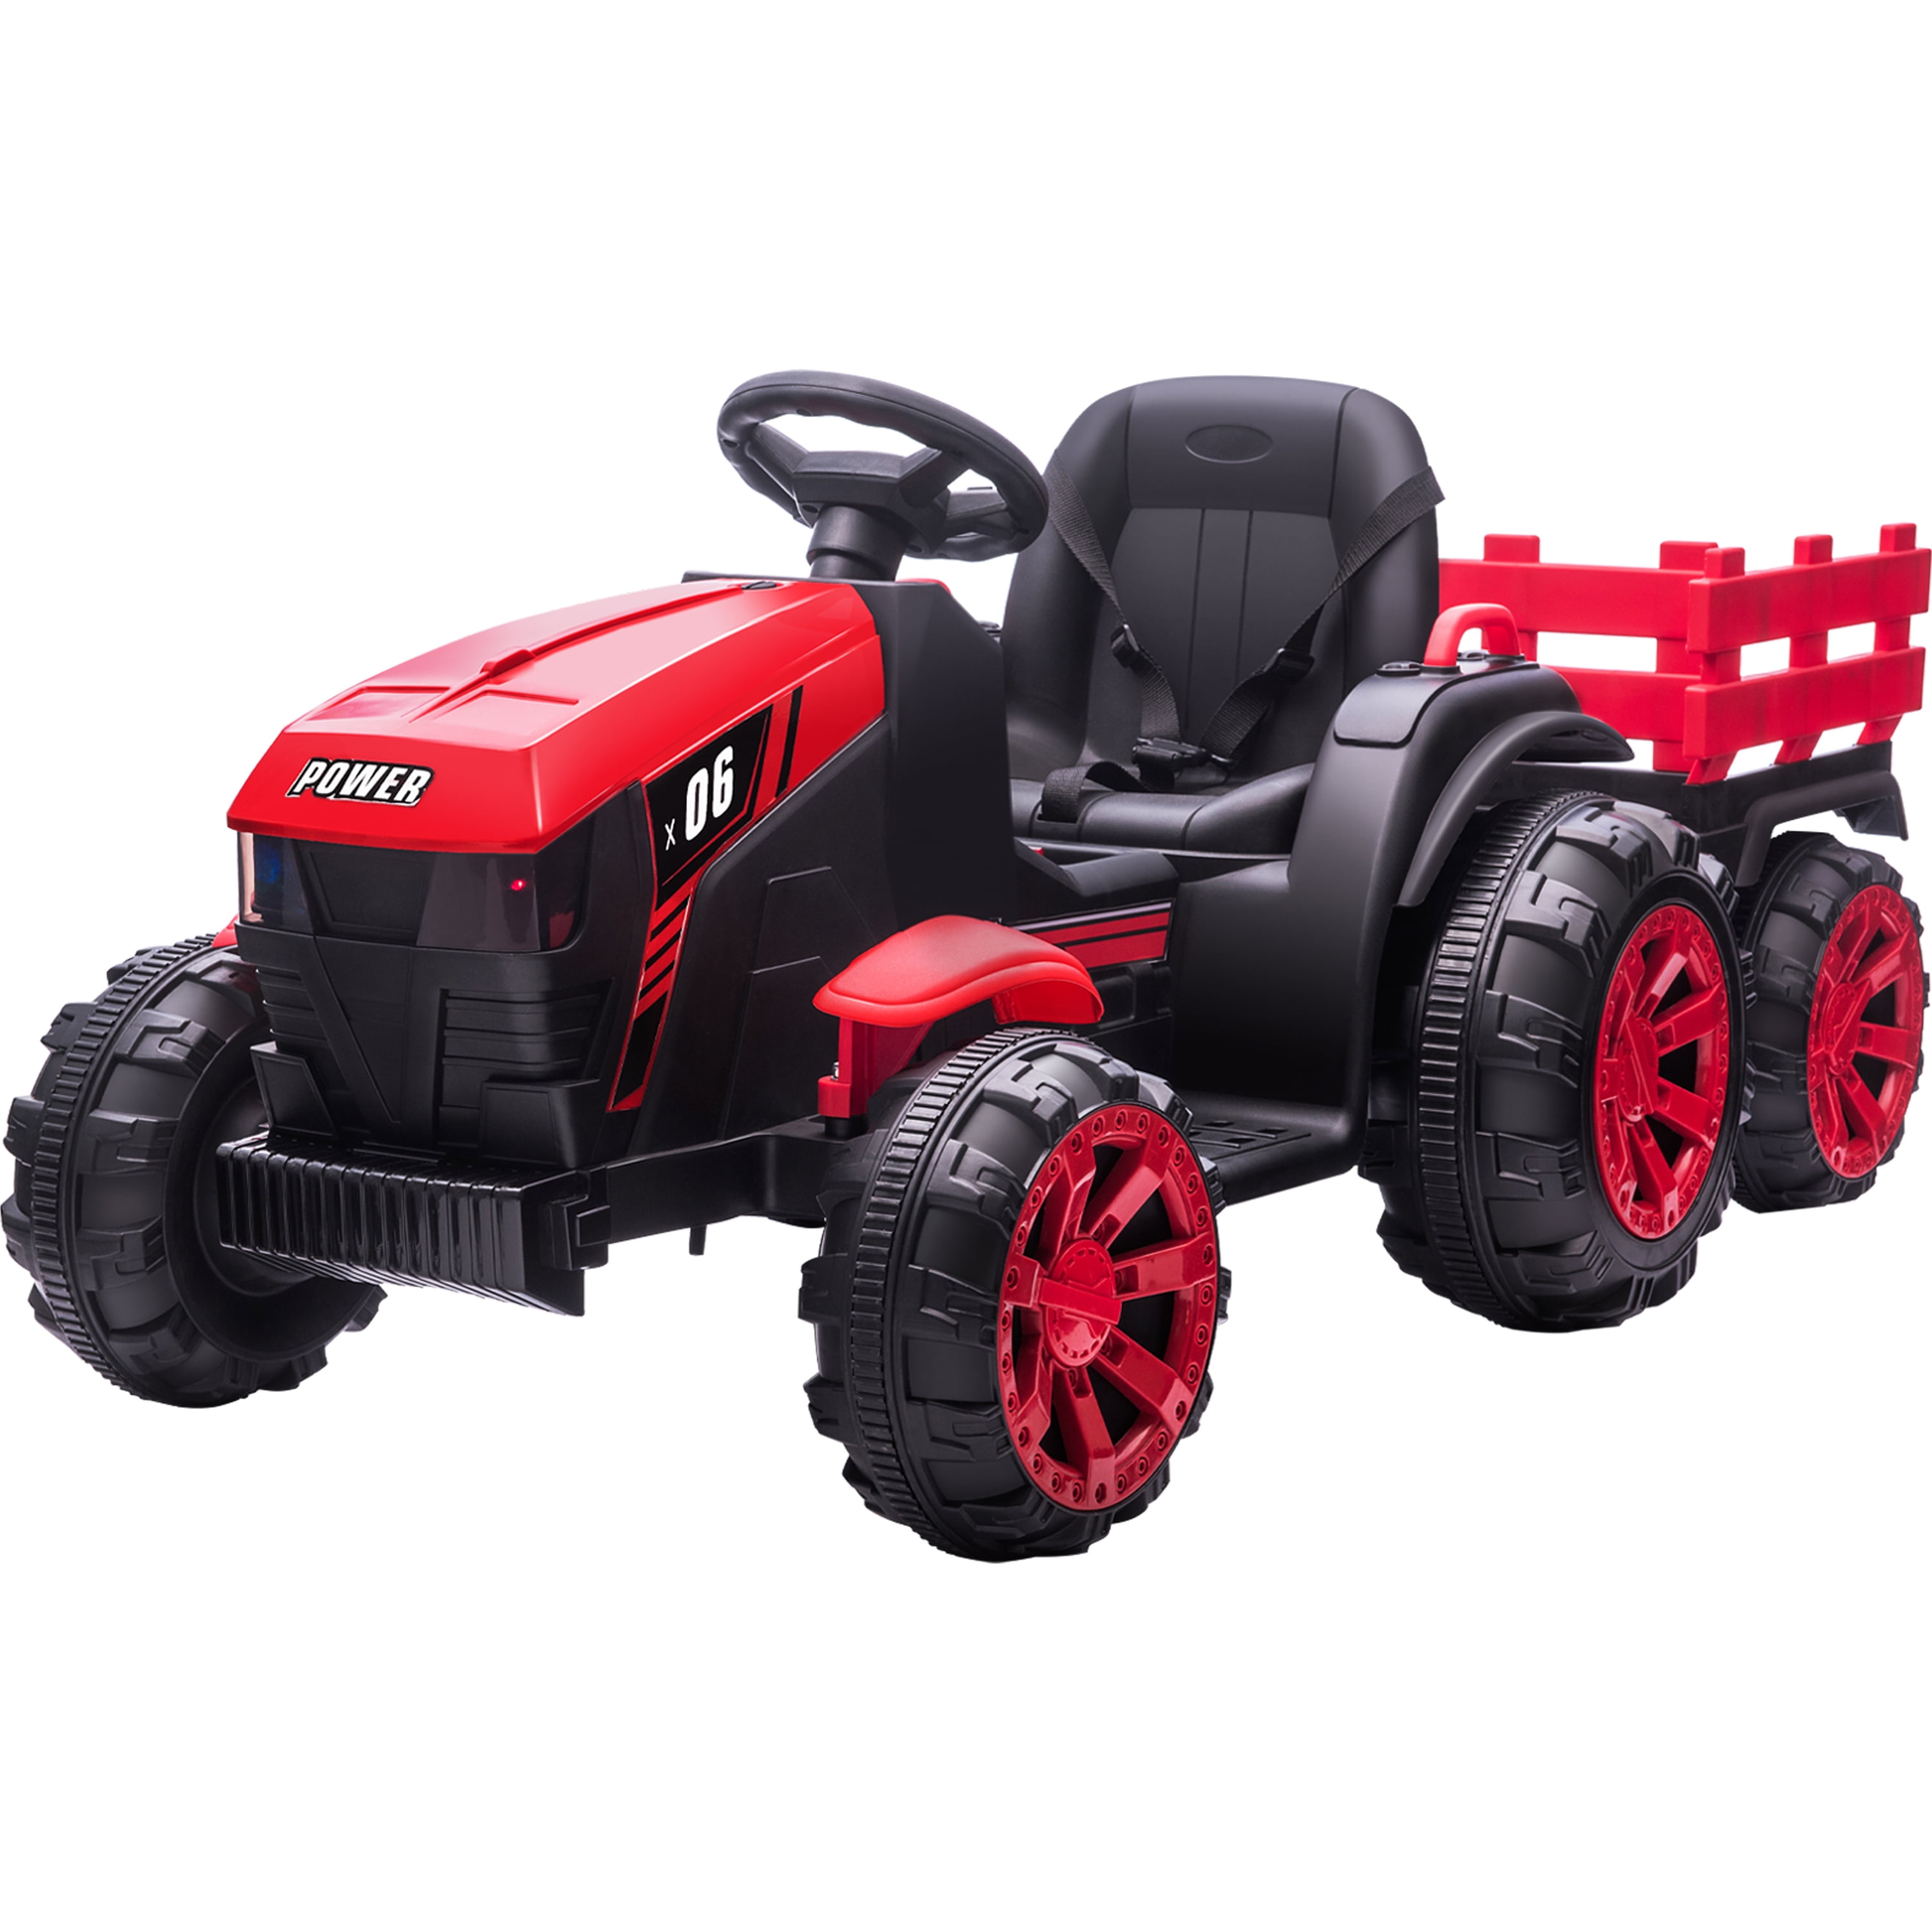 OTTARO 12v Battery-Powered Toy Tractor ,Kids Electric Tractor car with ...